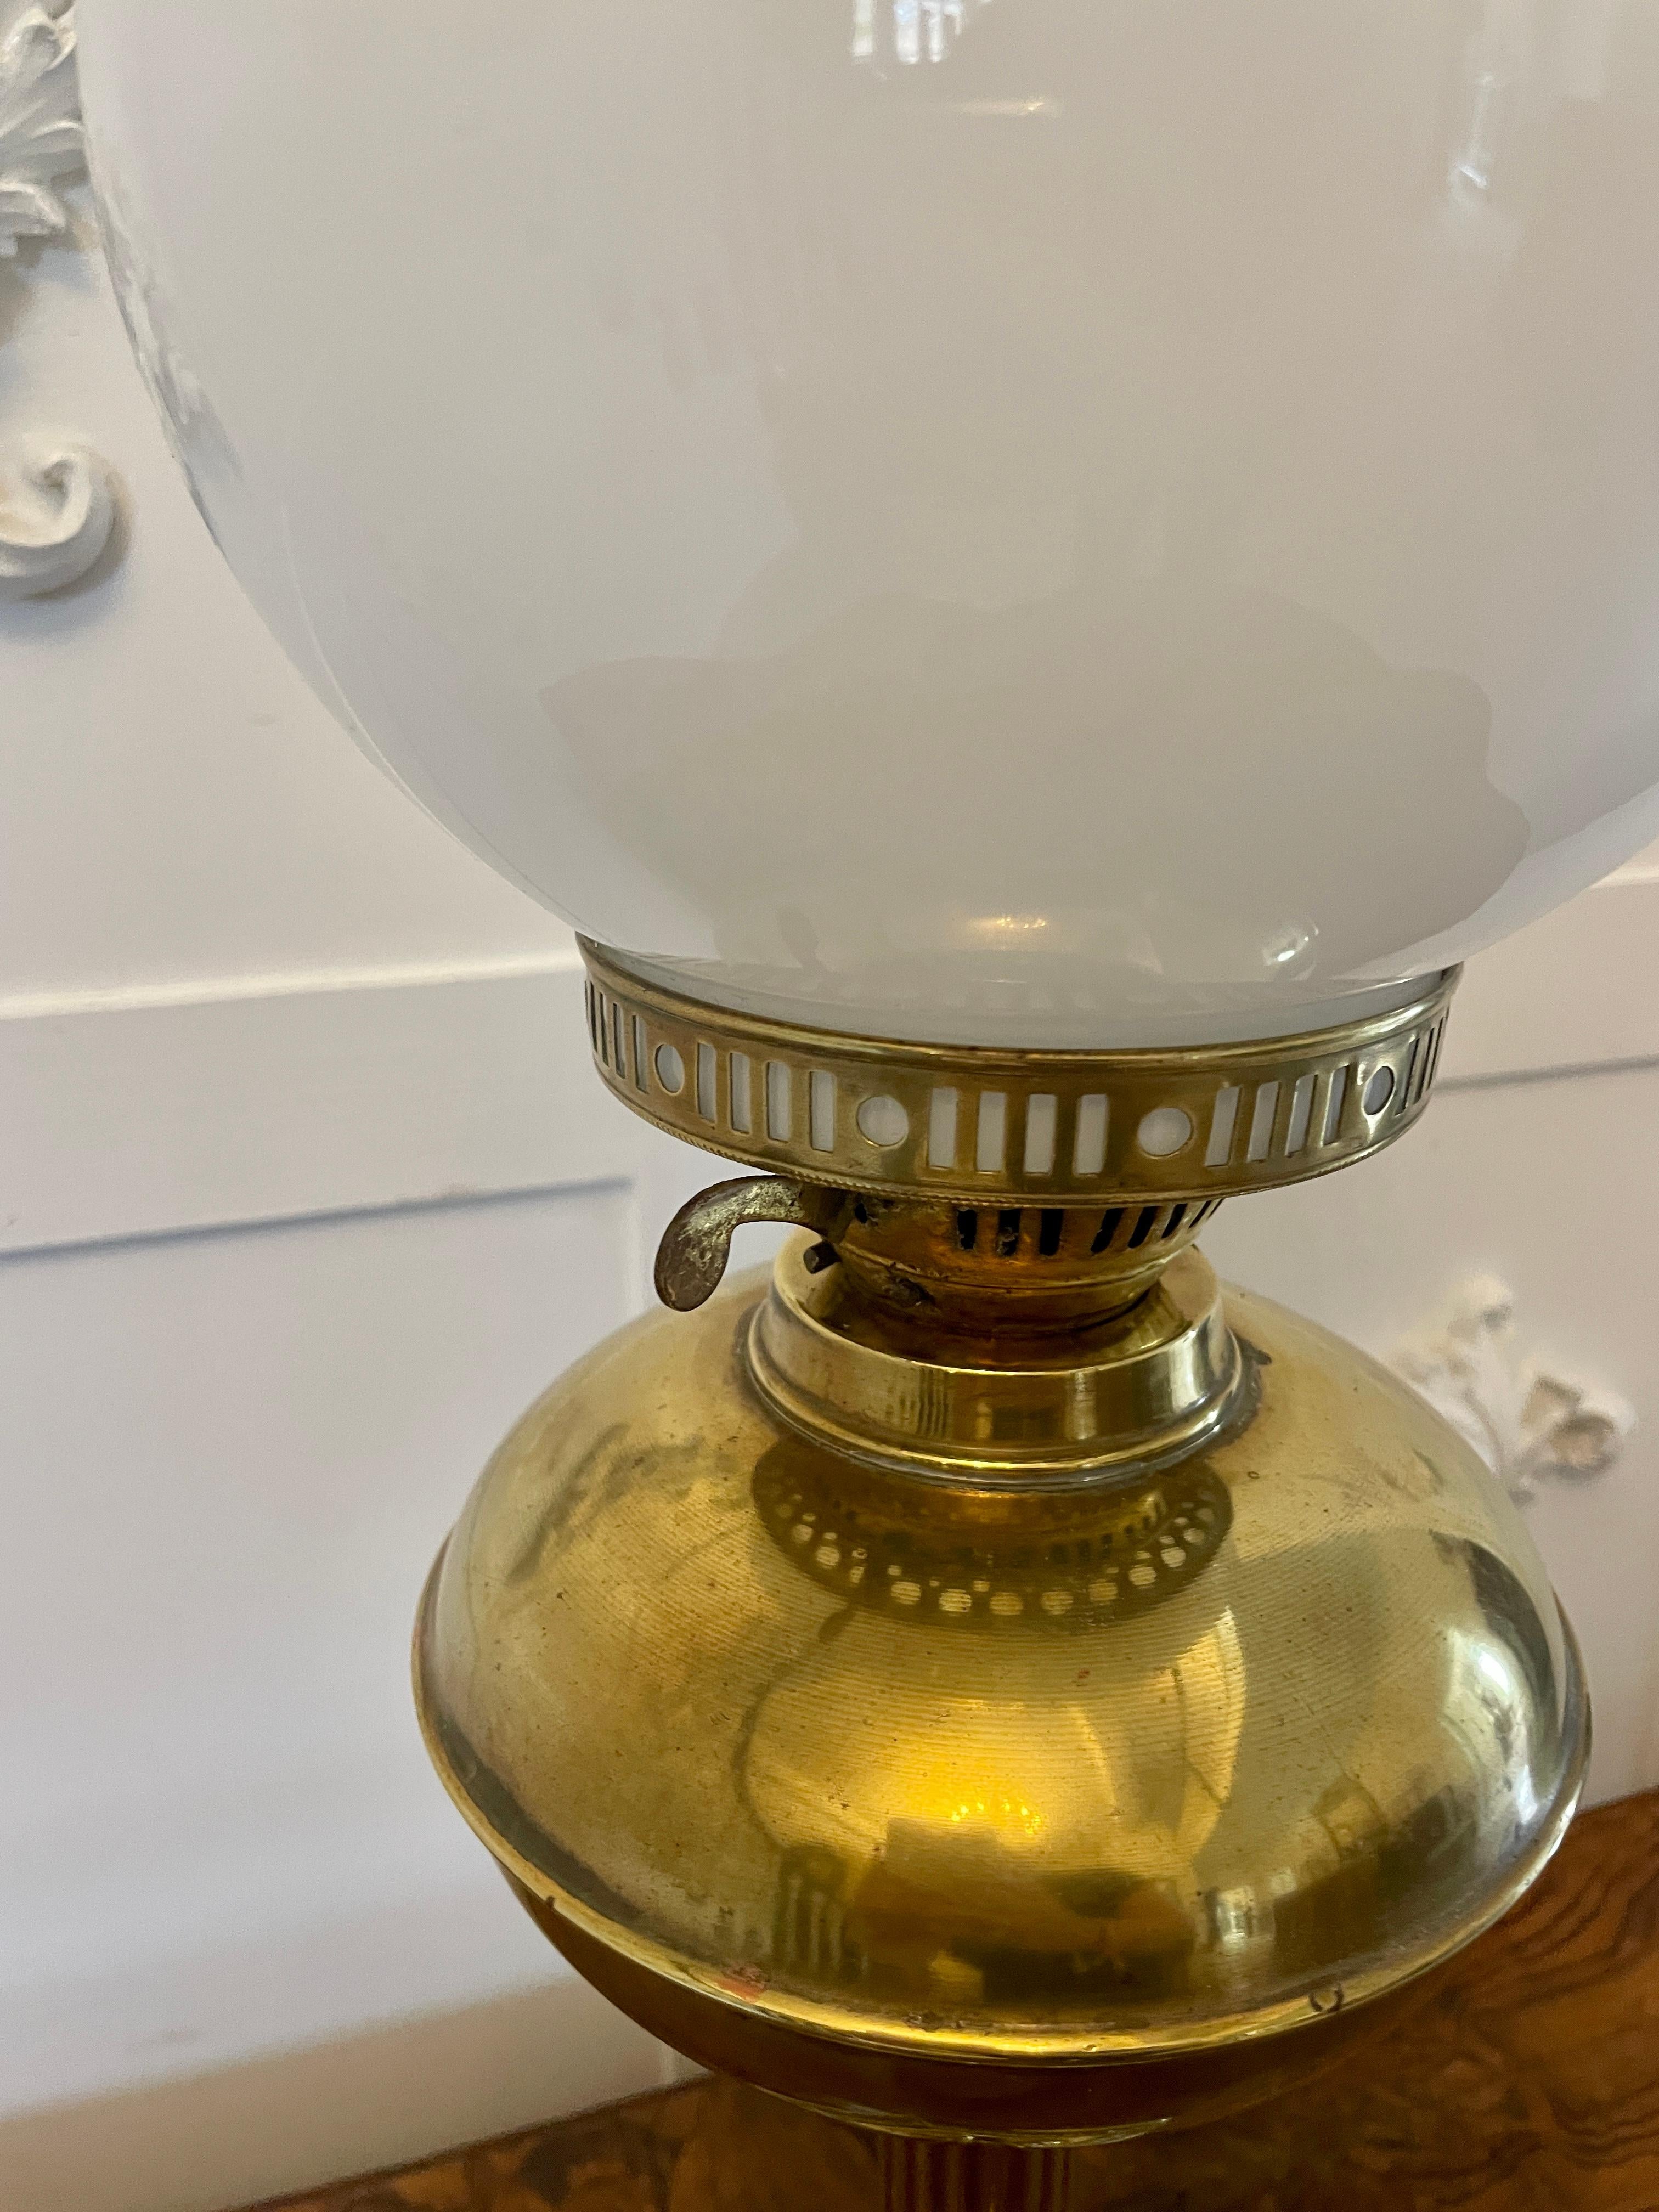 Antique Victorian reeded column quality brass oil lamp having the original glass shade and chimney, double burner,  brass font supported by a reeded column standing on an ornate brass stepped base


Dimensions:
Height 60 cm (23.62 in)
Width 19 cm